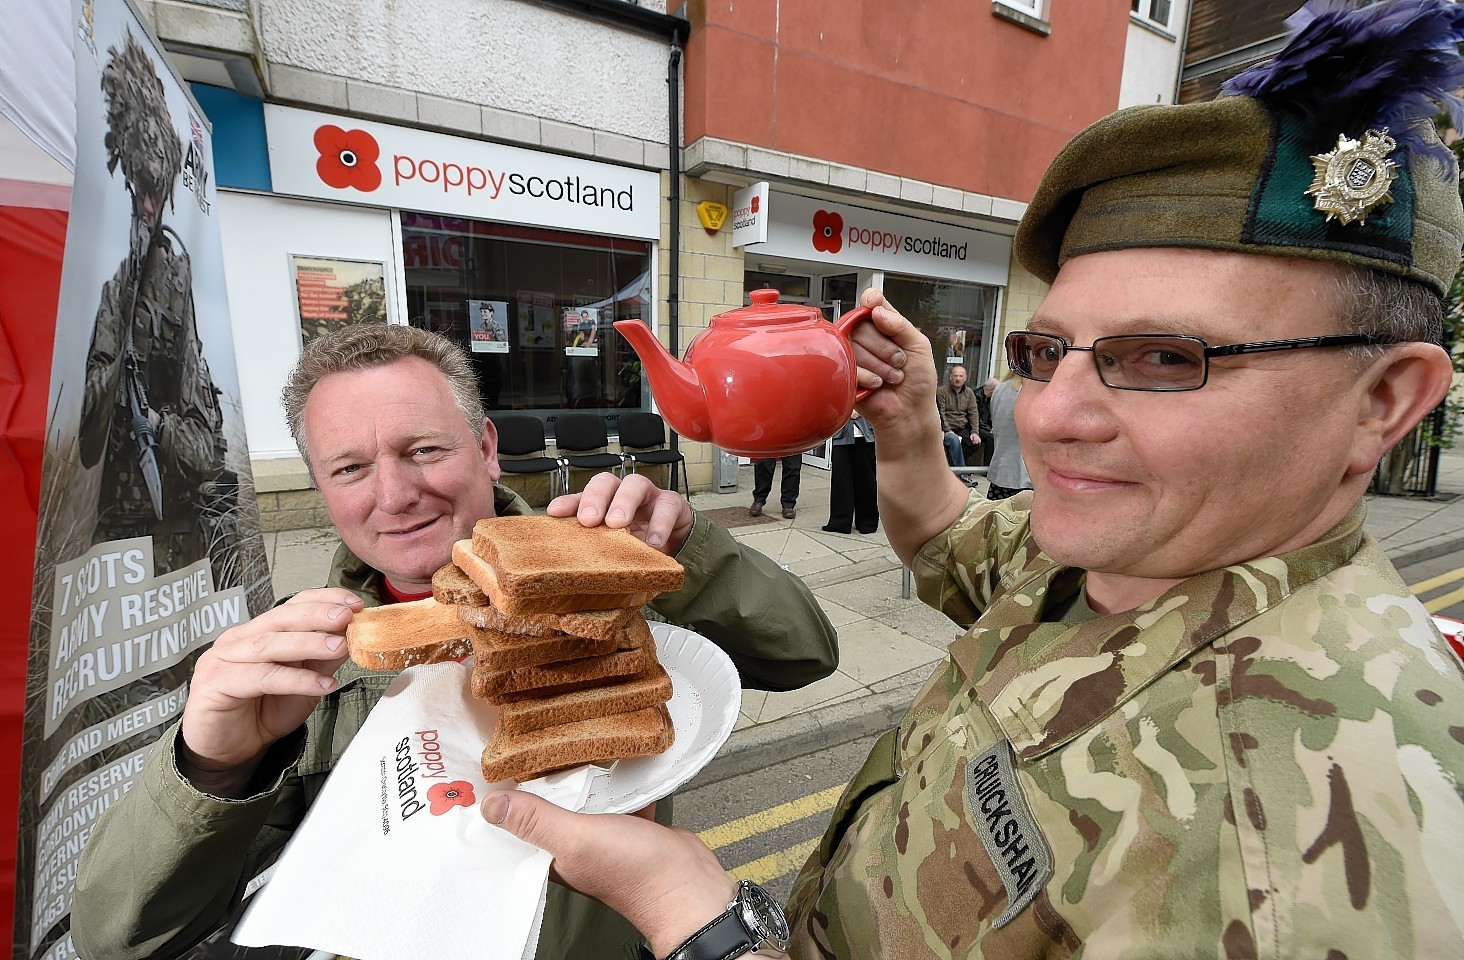 Poppyscotland launched their pop-up field kitchen on Strothers Lane